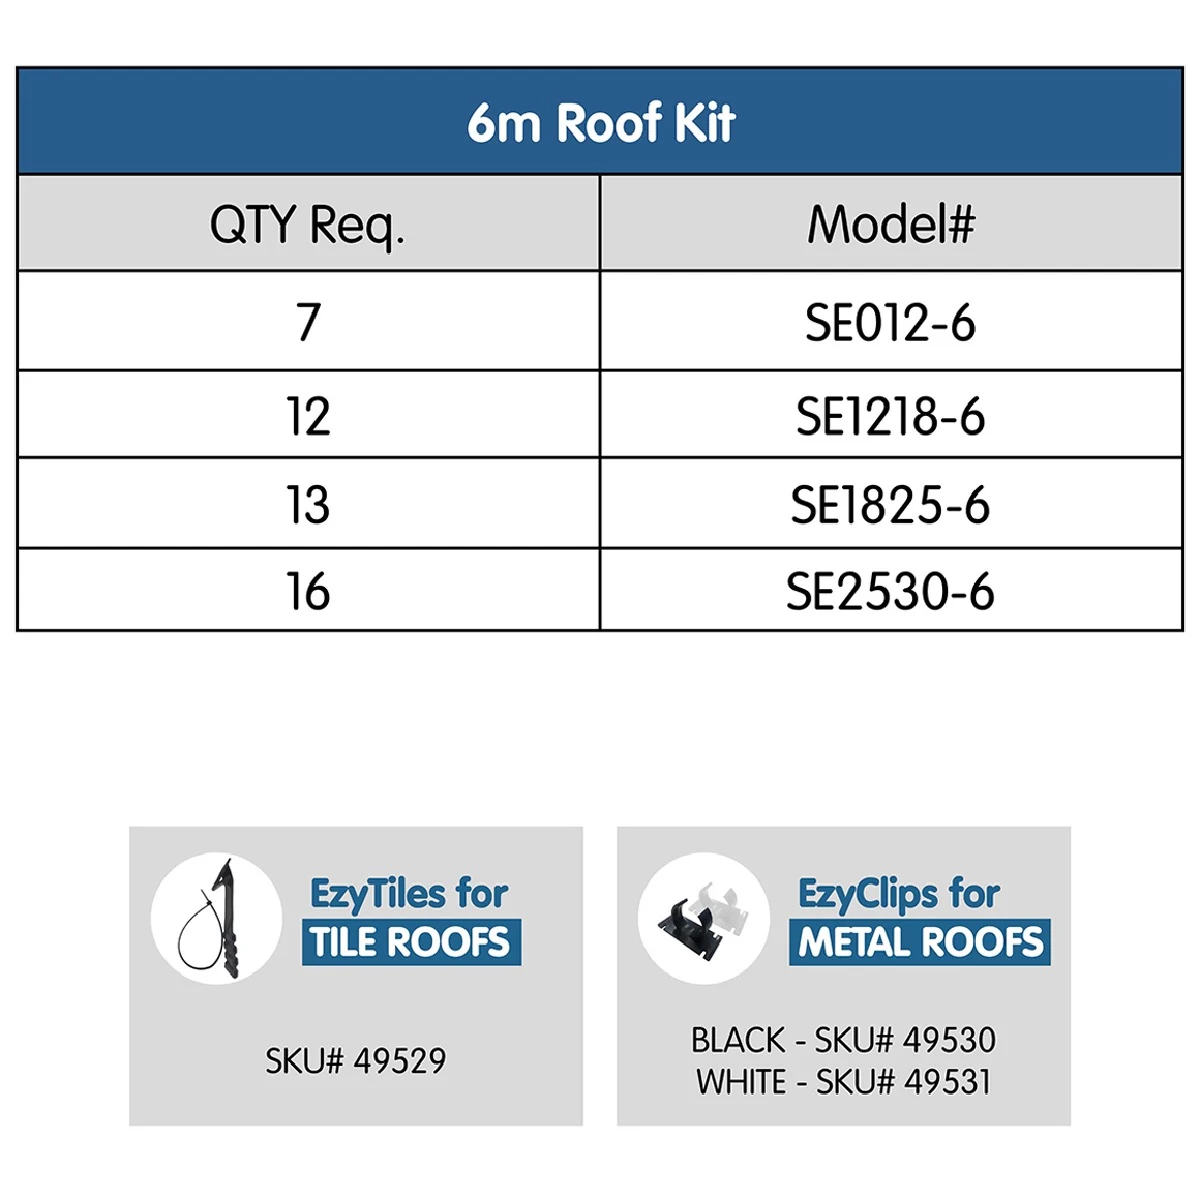 SOLAR EEZY POOL HEATING KITS FOR 6M ROOF SE012-6 SUITS 0-12SQM POOL